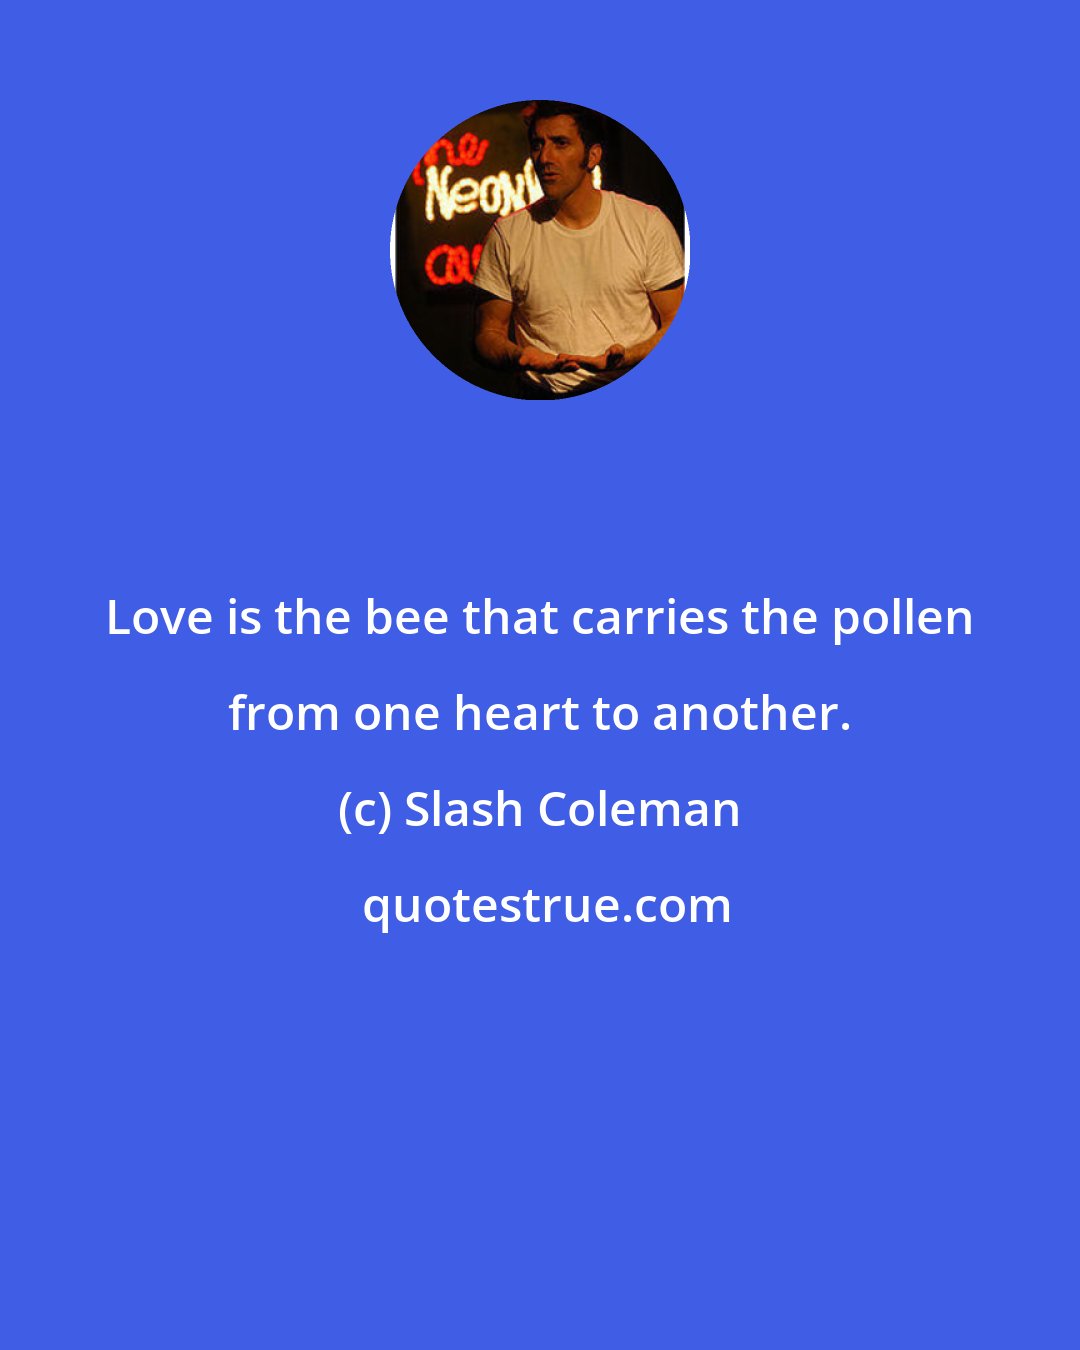 Slash Coleman: Love is the bee that carries the pollen from one heart to another.